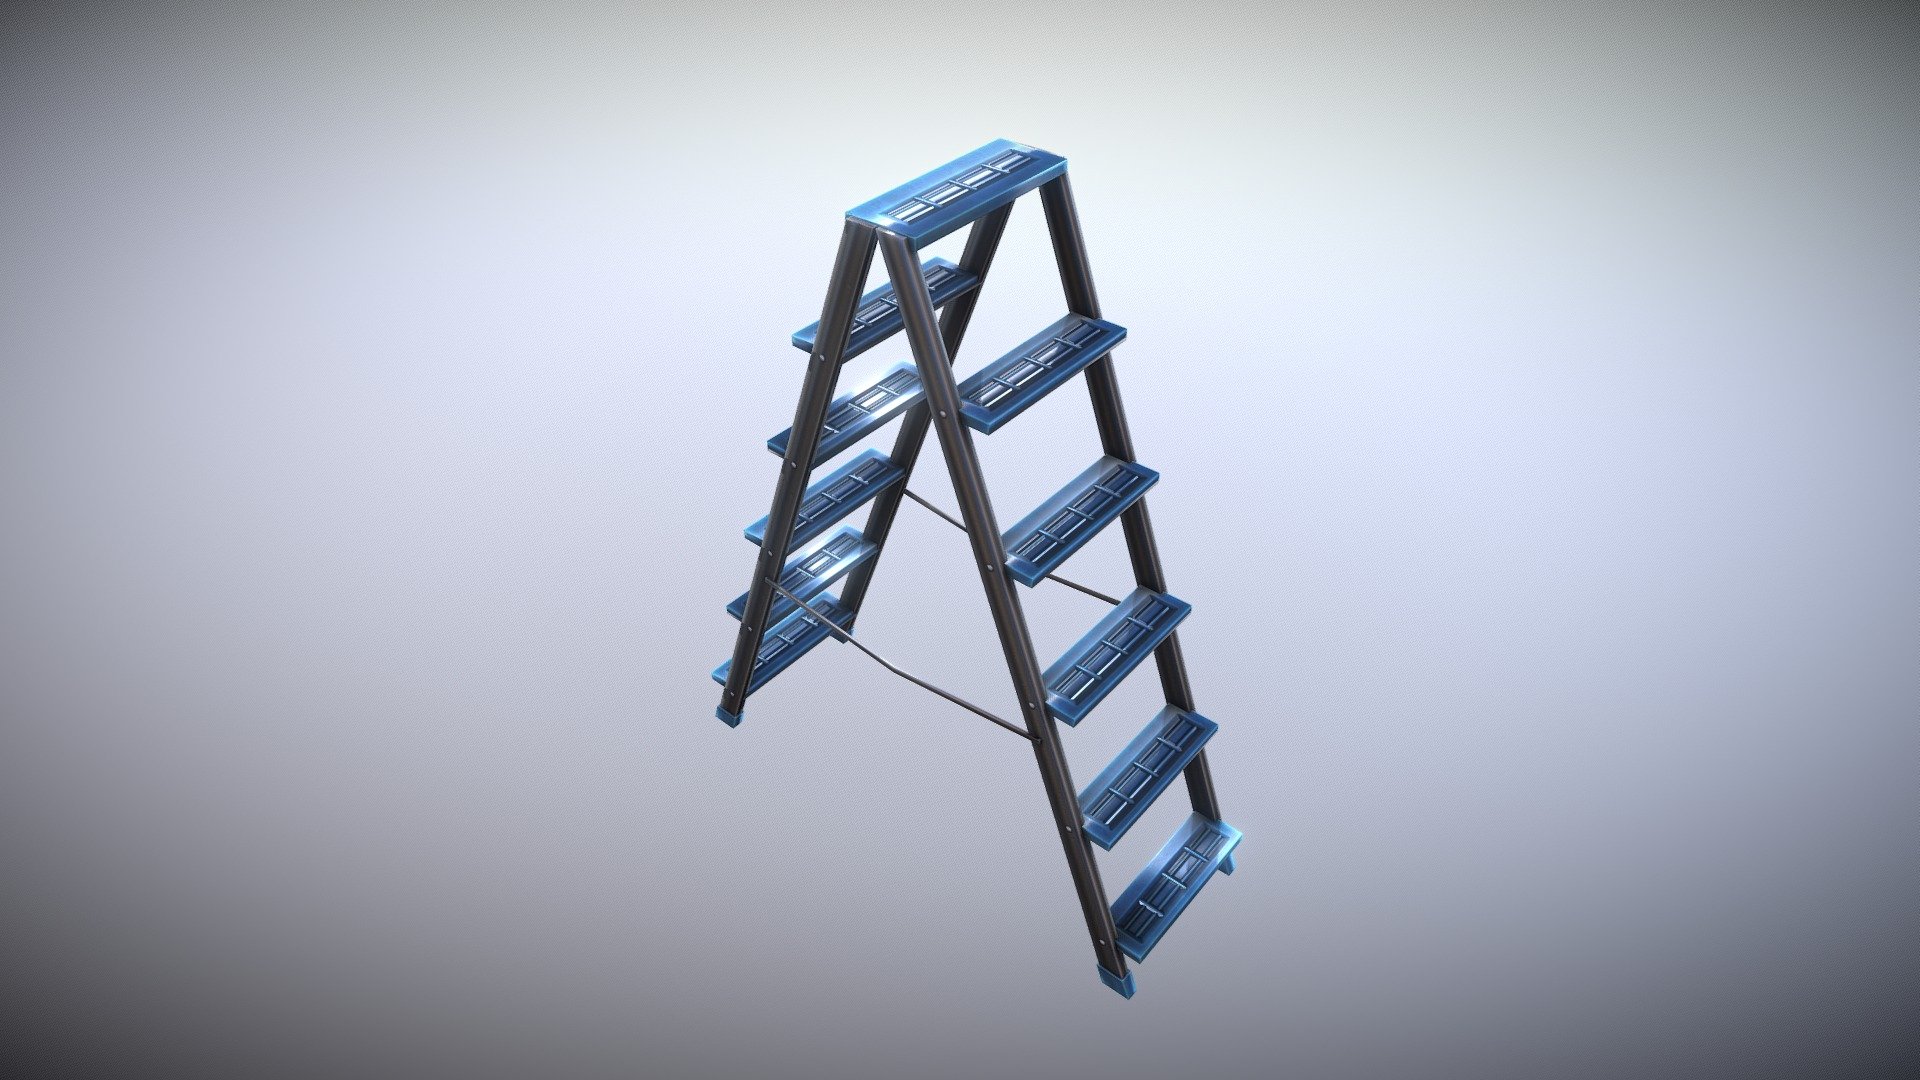 Very low poly game model 3d model